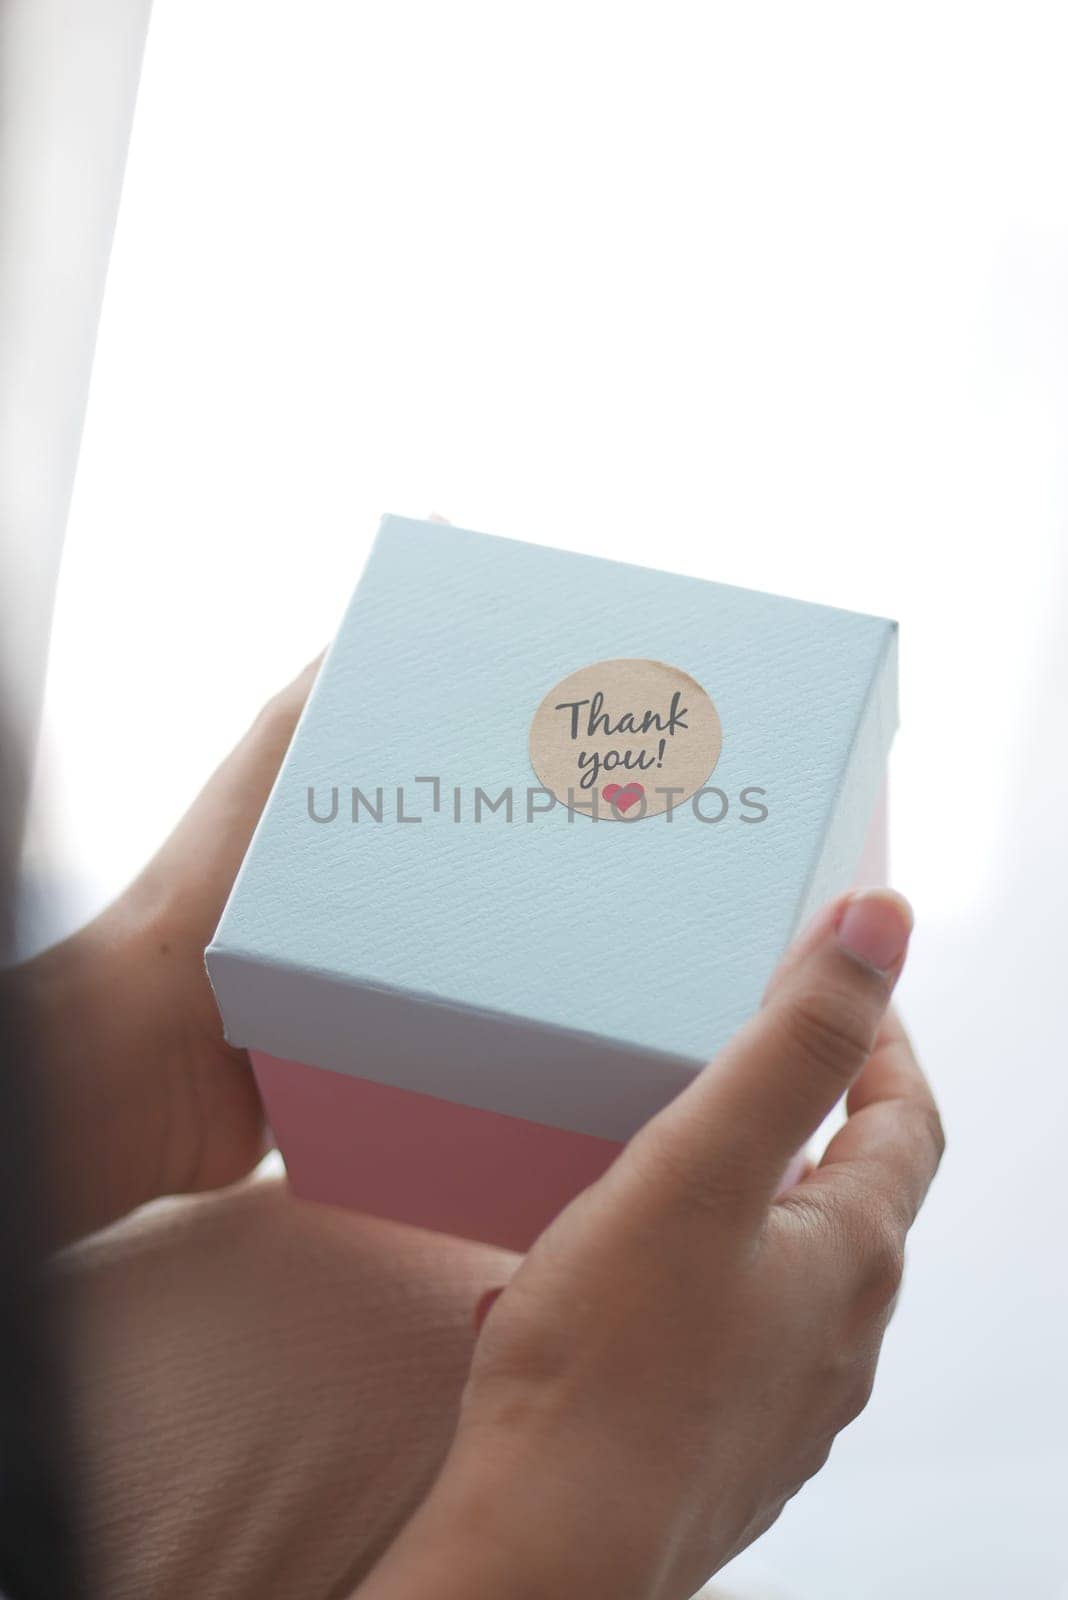 hand putting a thank you sticker on a gift box by towfiq007